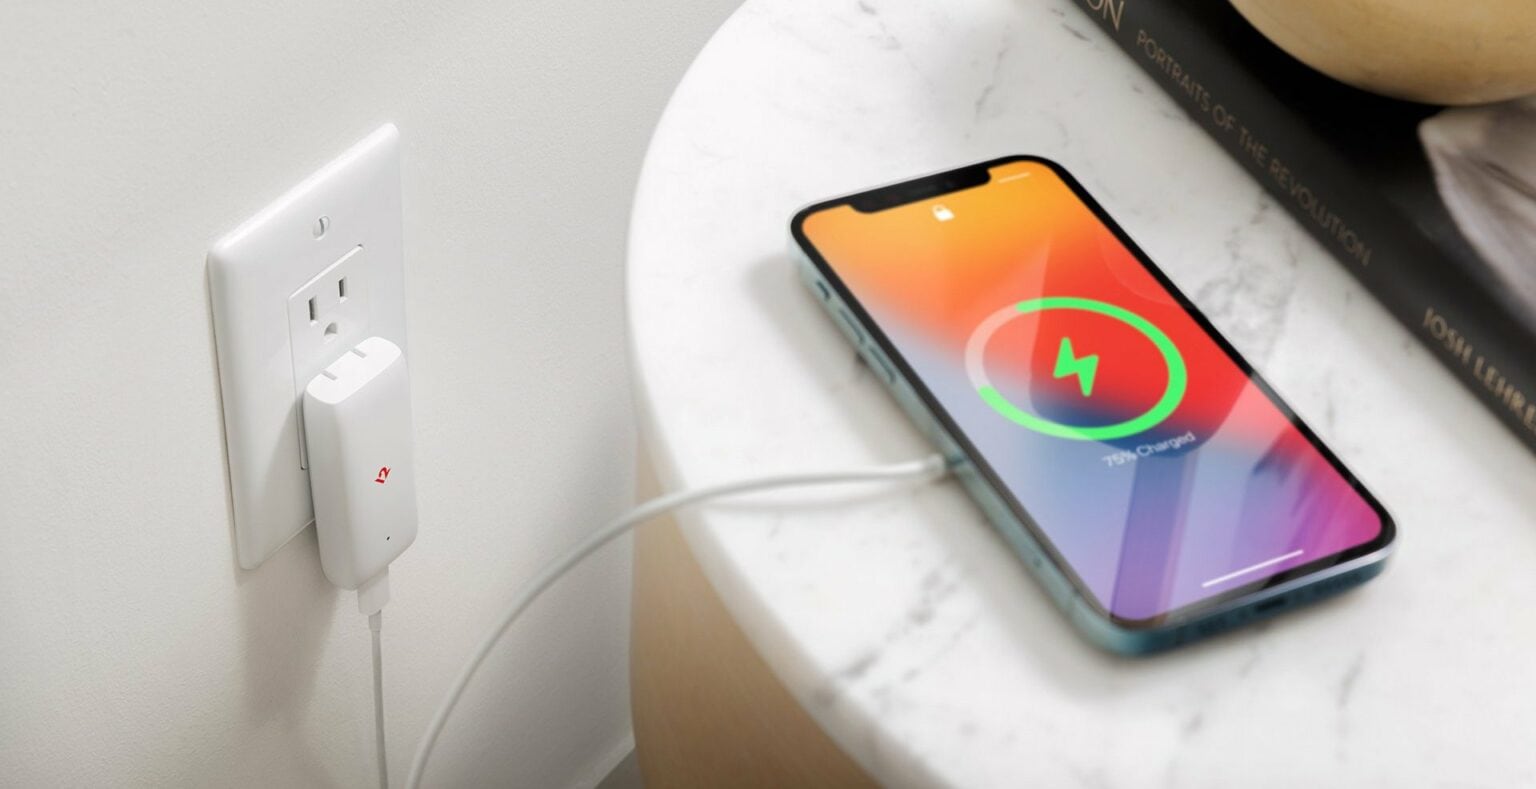 Twelve South's new PlugBug Slim USB-C charger packs 20W of power.